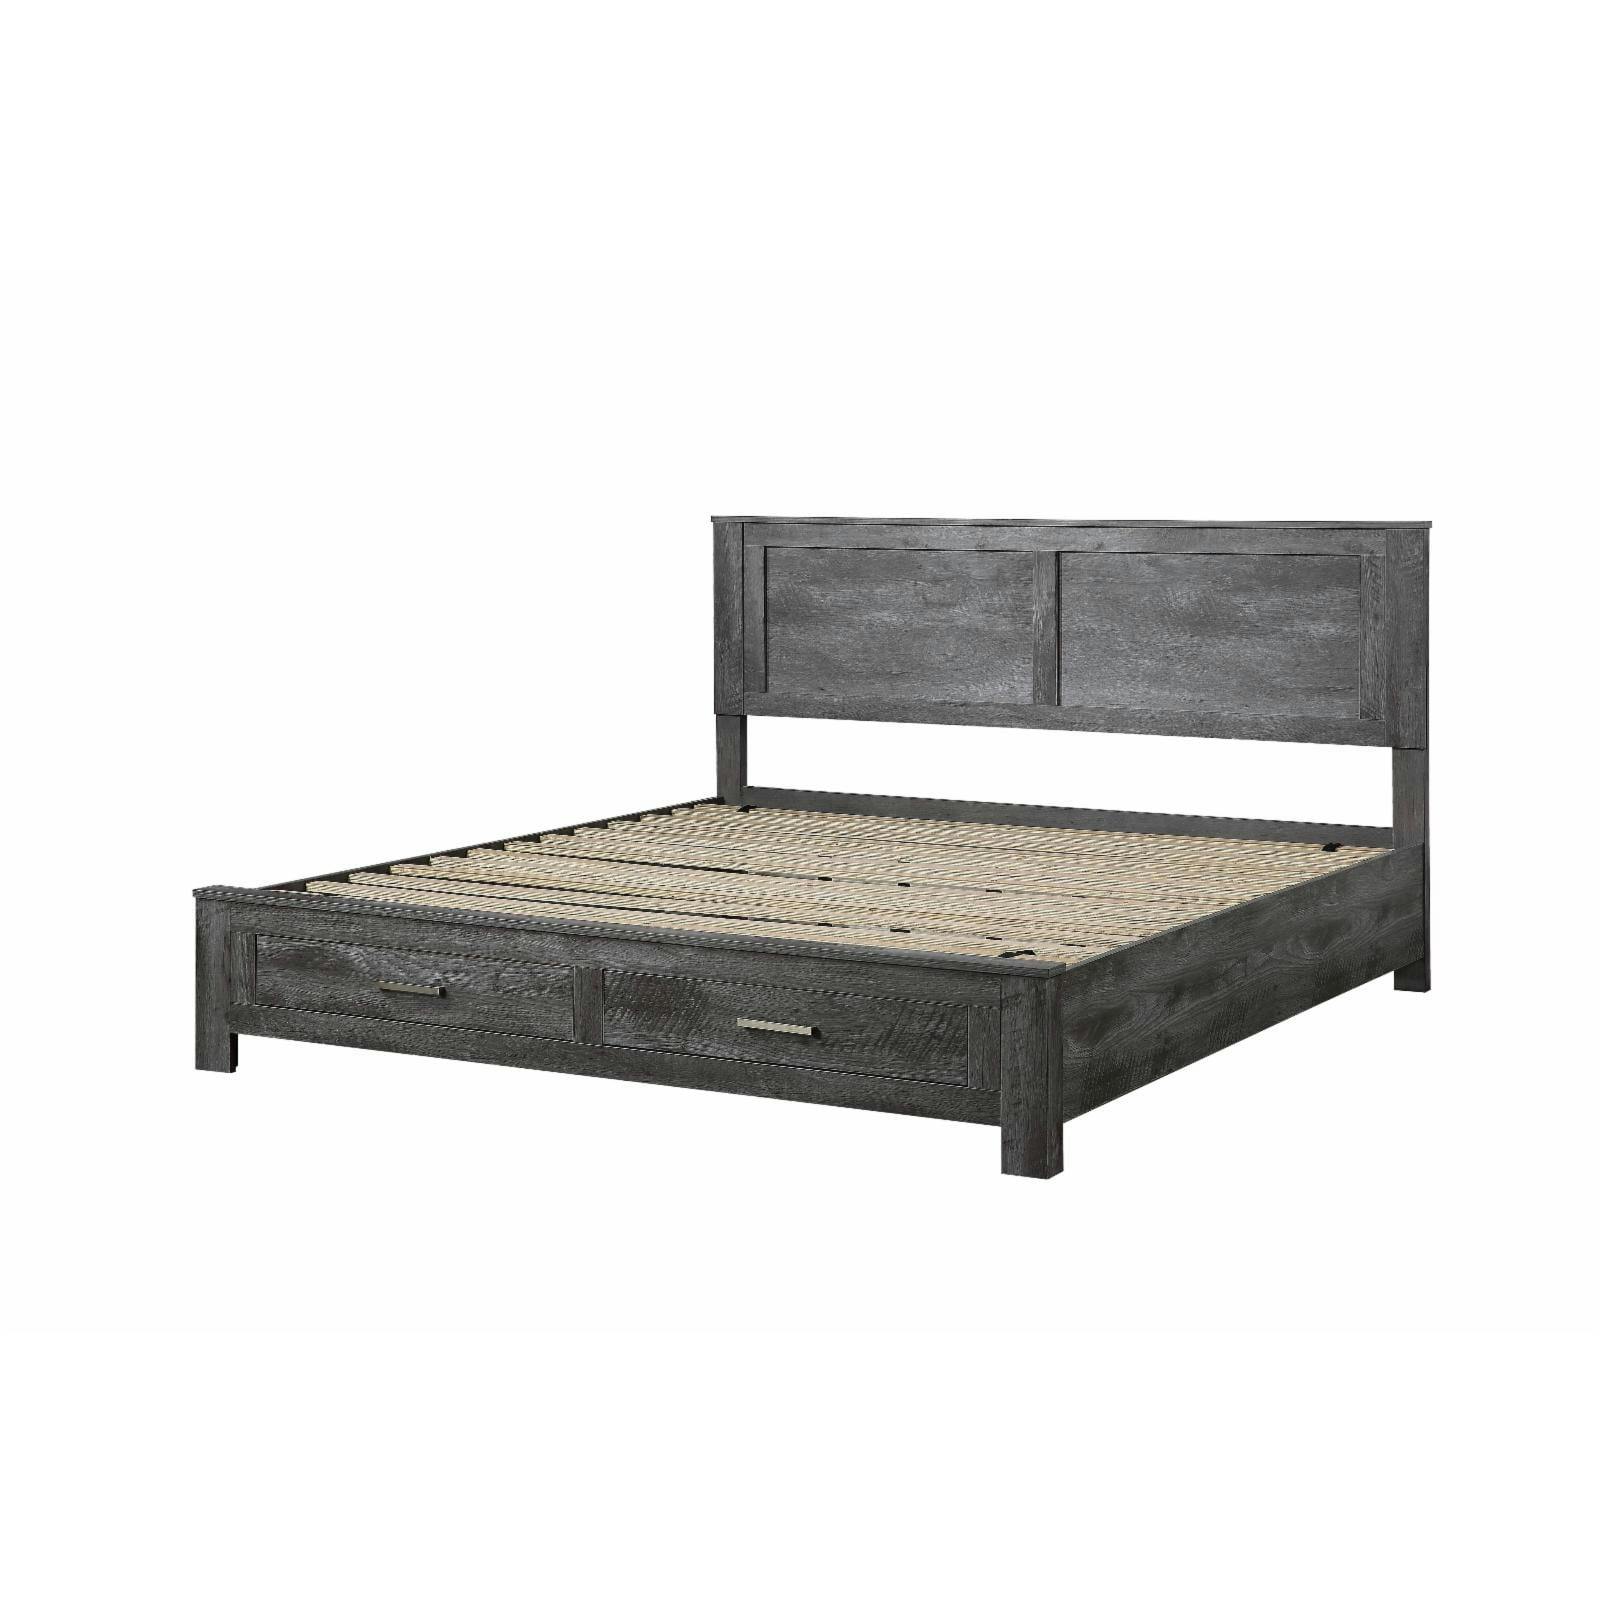 Rustic Gray Oak Queen Bed with Dual Storage Drawers